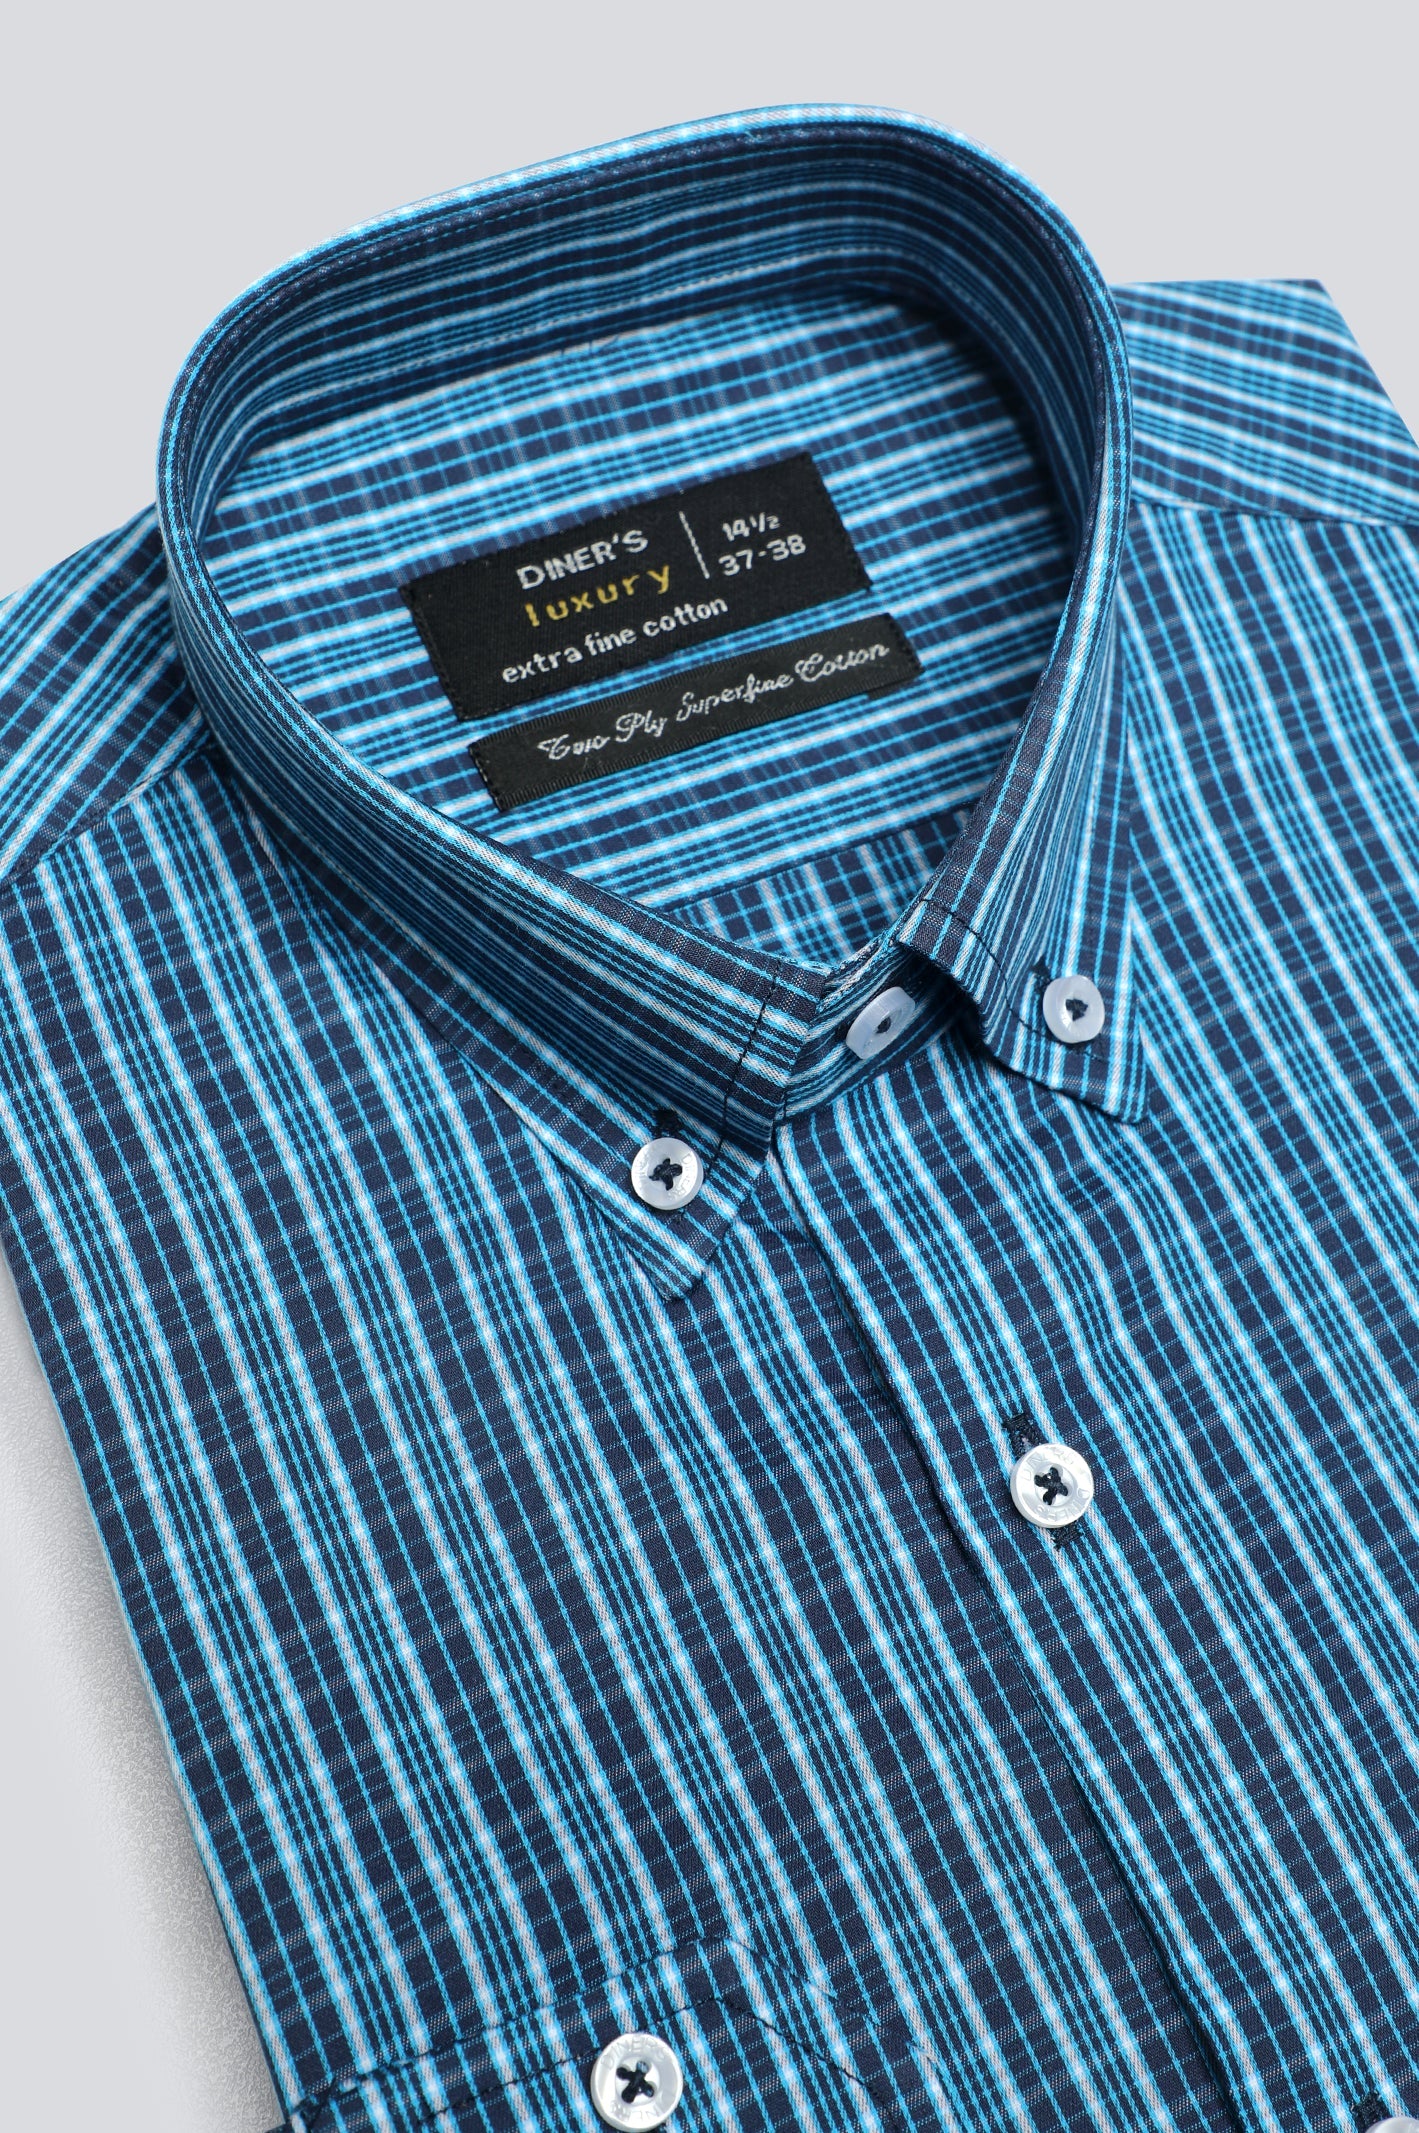 Multicolor Glen plaid Check Formal Shirt From Diners